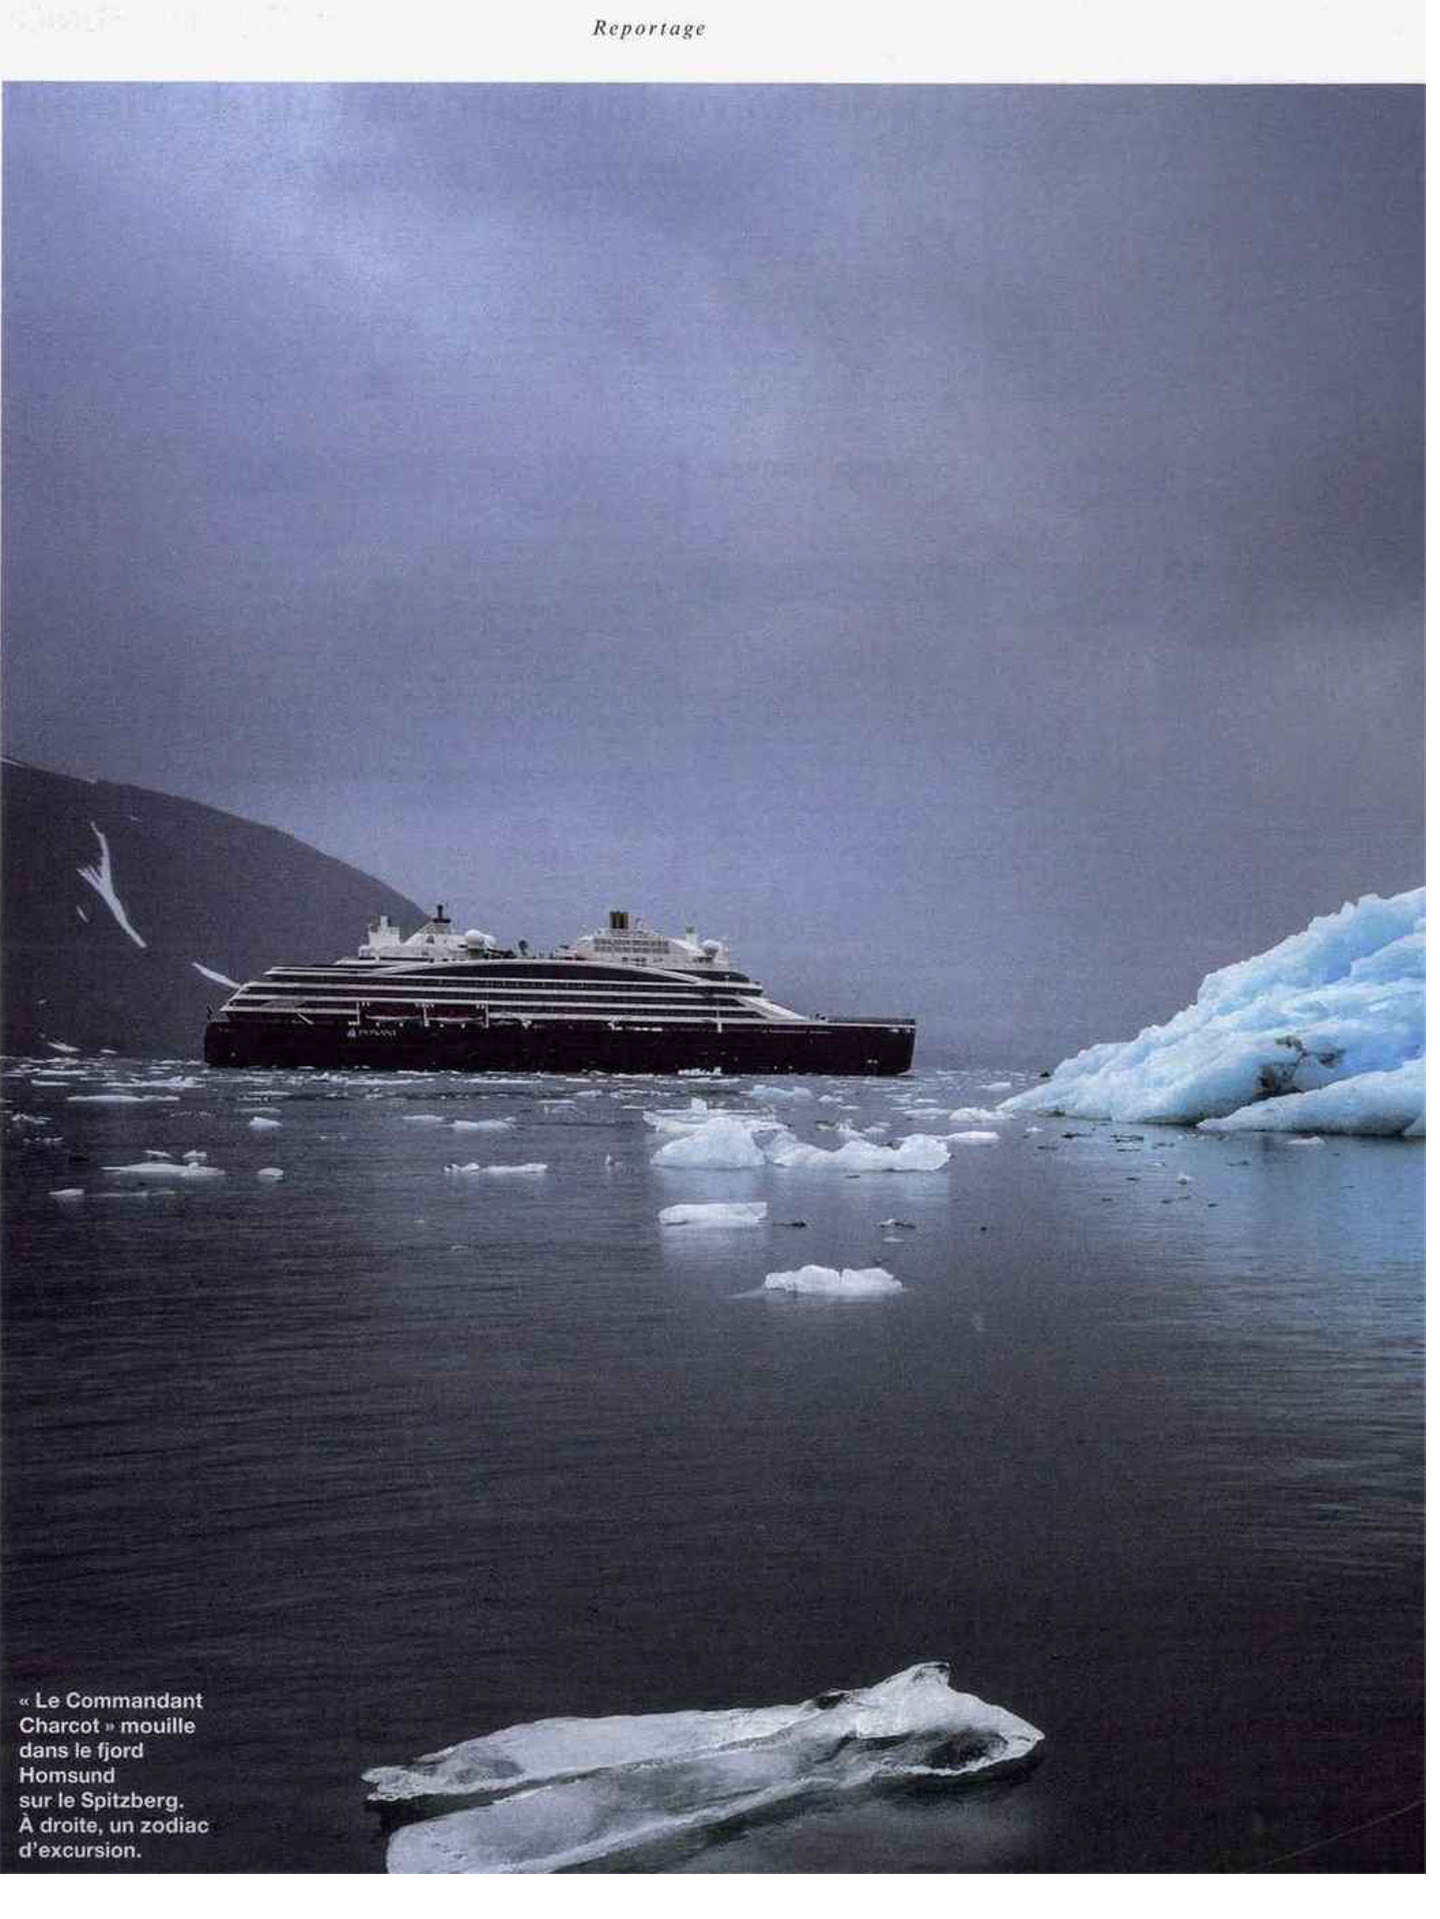 article on commander charcot of ponant in figaro magazine, interior design by jean-philippe nuel, luxury polar expedition ship, cruise, luxury ship, interior design